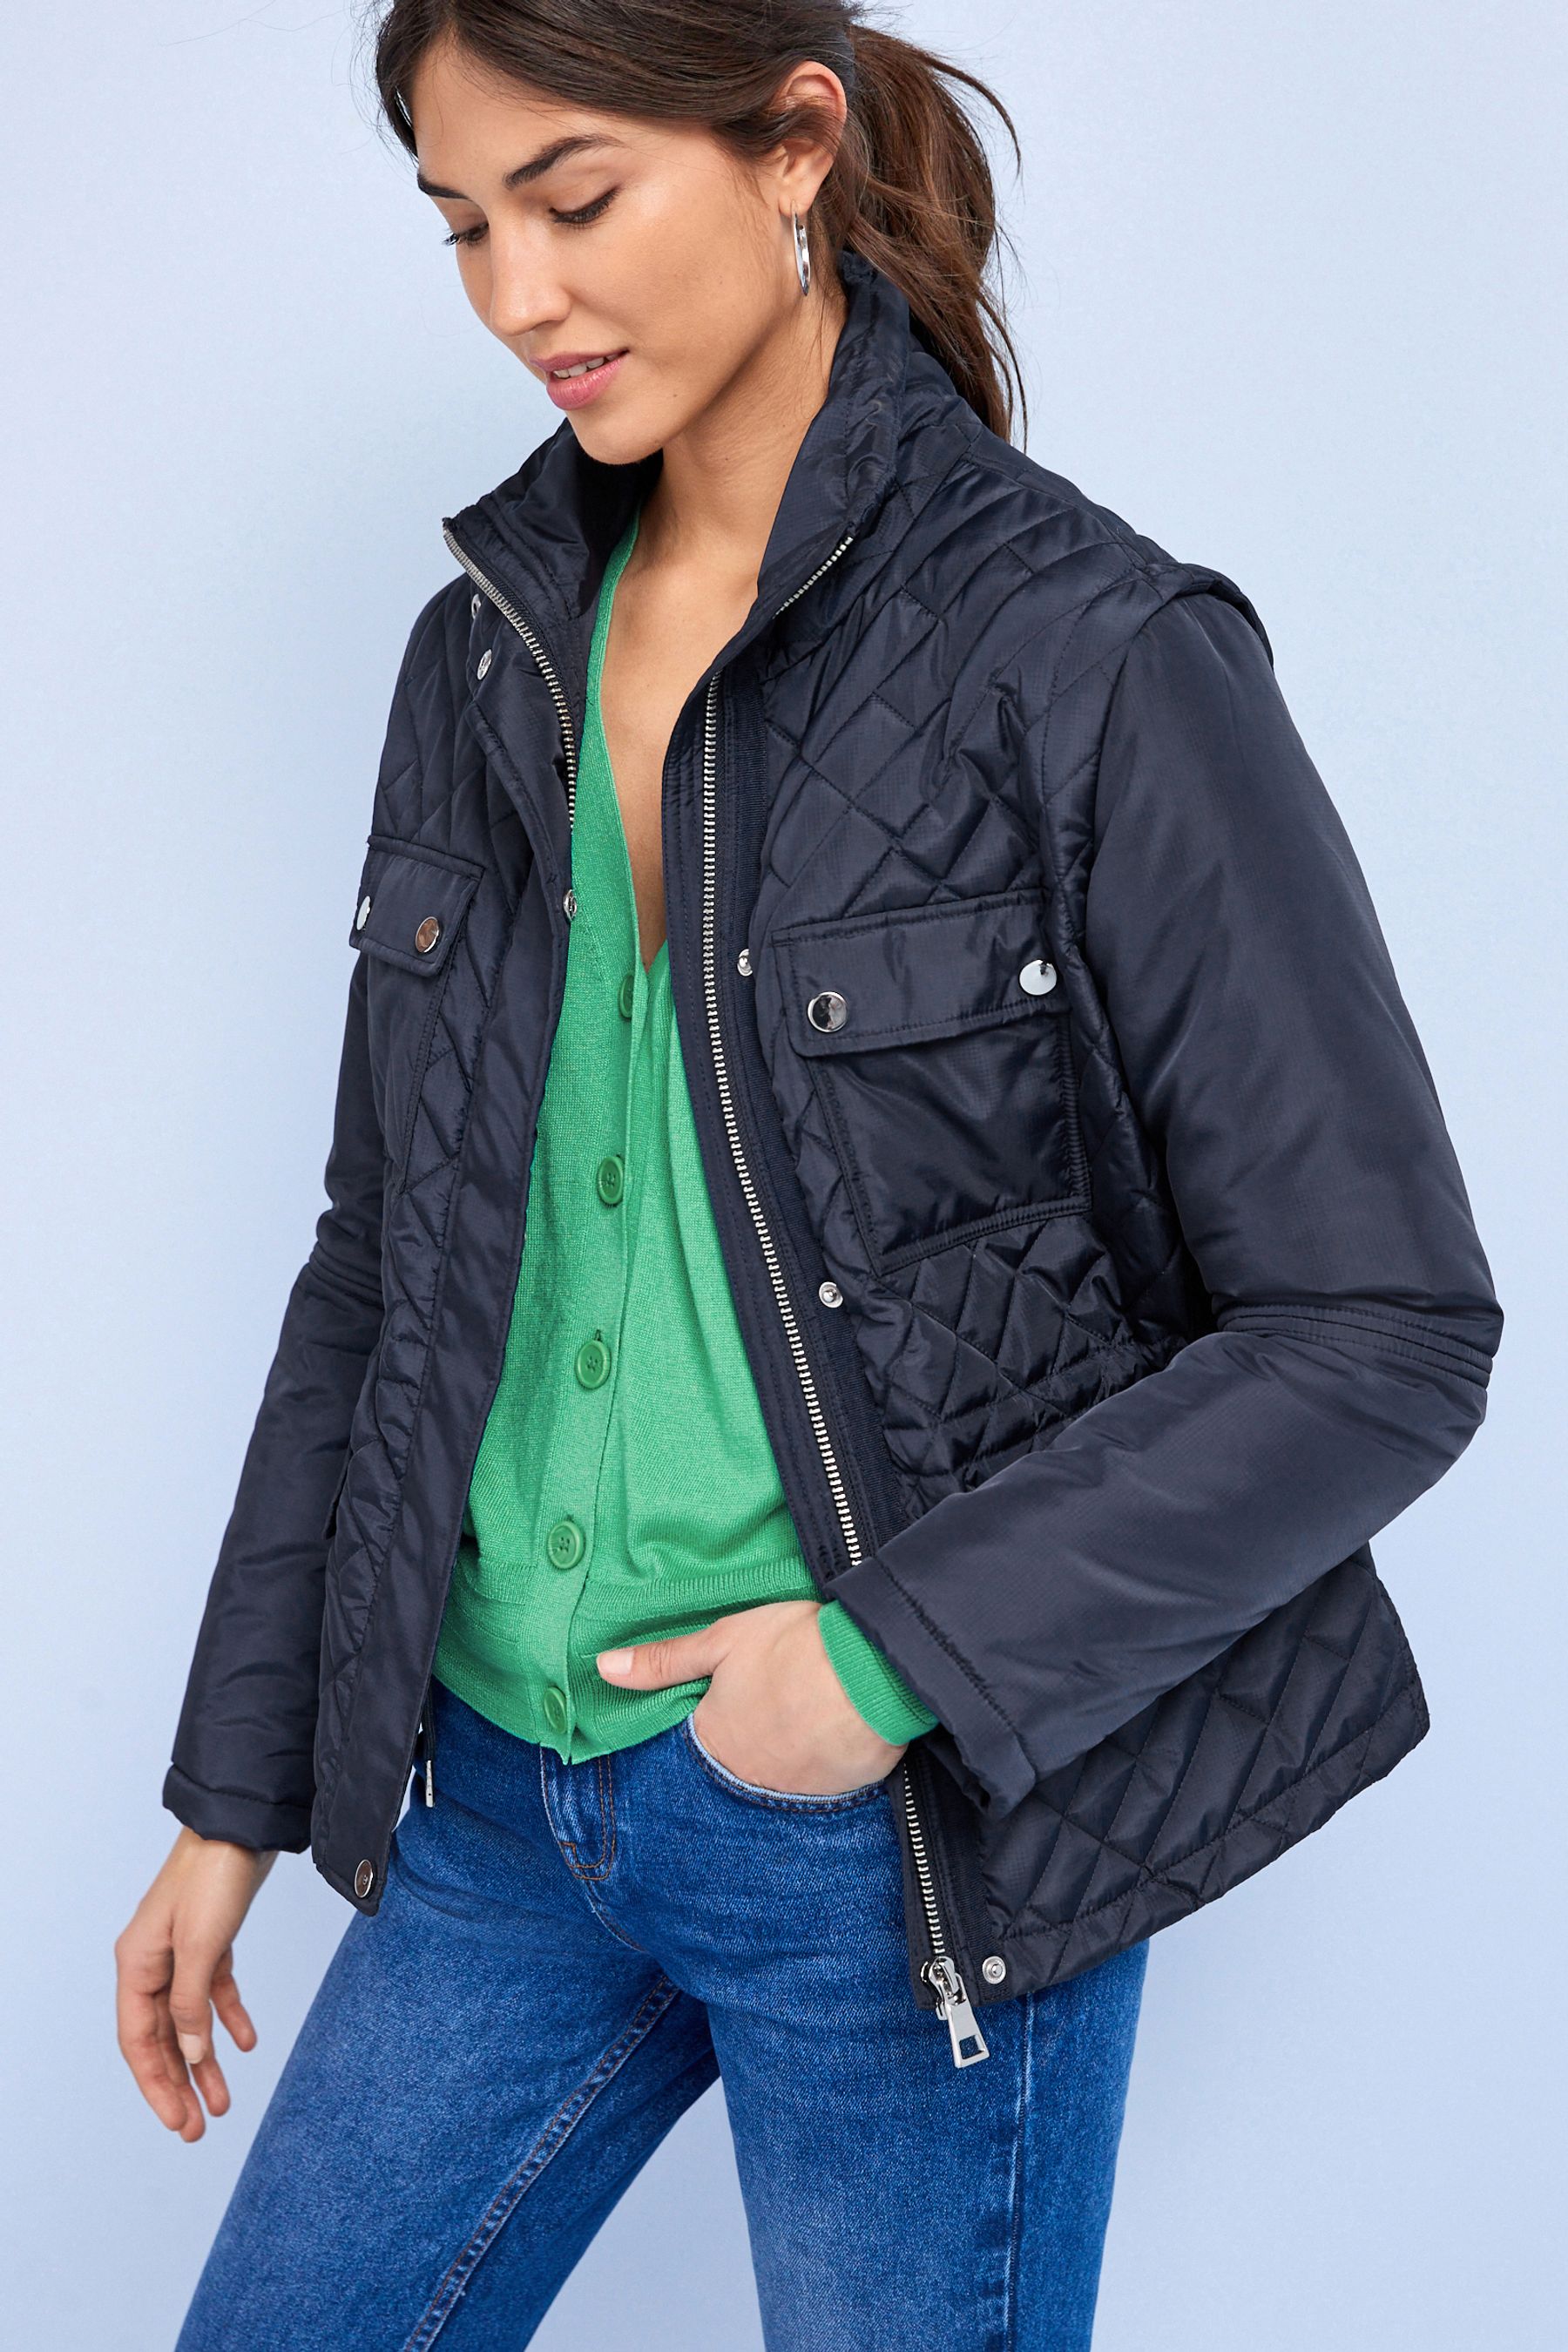 Buy Navy Blue Short Quilted Jacket from the Next UK online shop